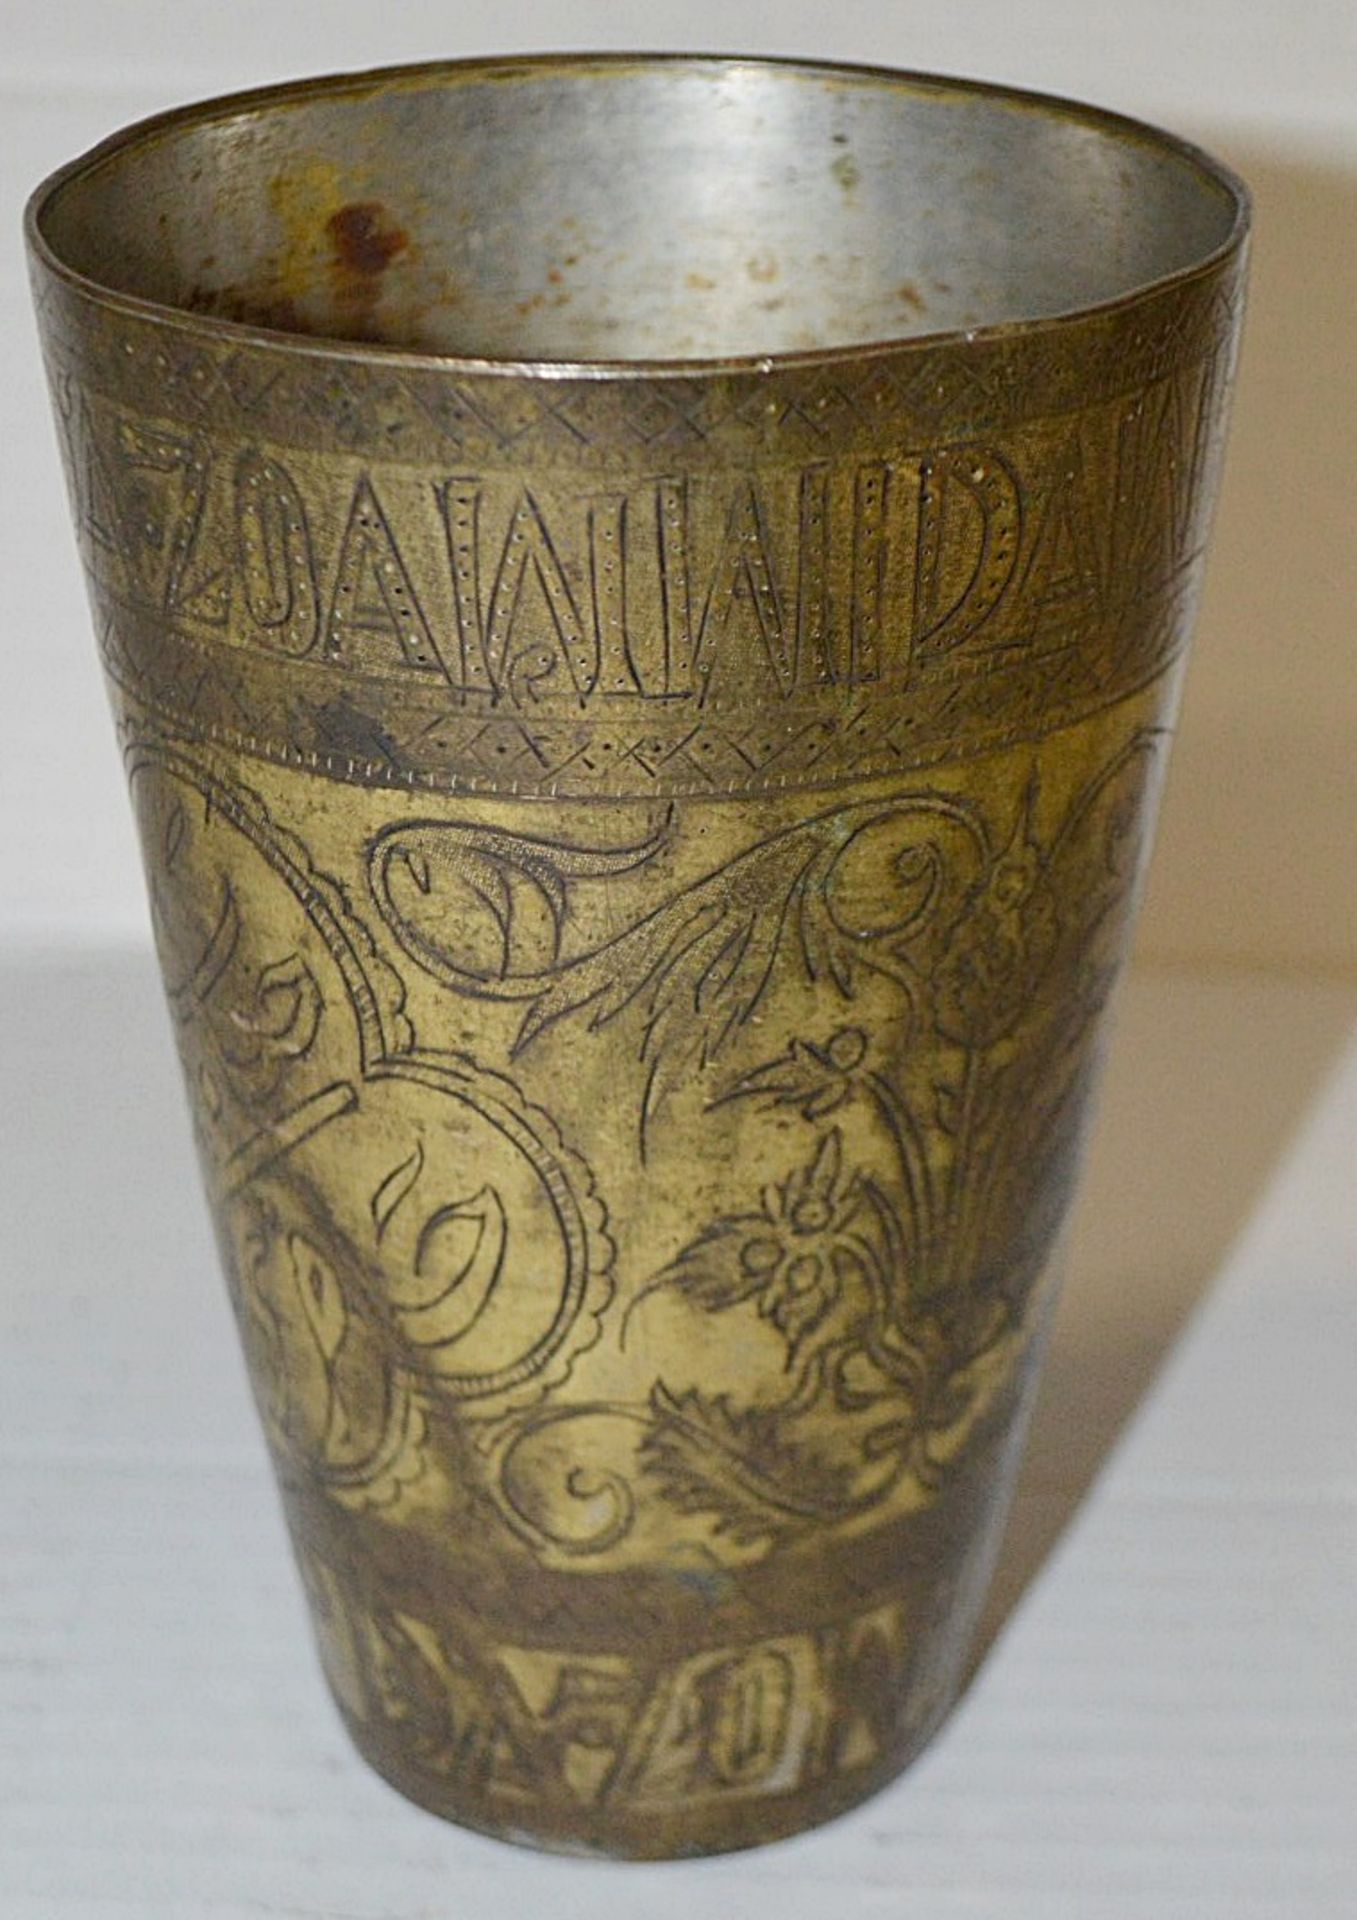 1 x Persian Gilded Tinner Beaker - Decorated With Floral Design And Scripture - Height: 14.5cm (5. - Image 3 of 6